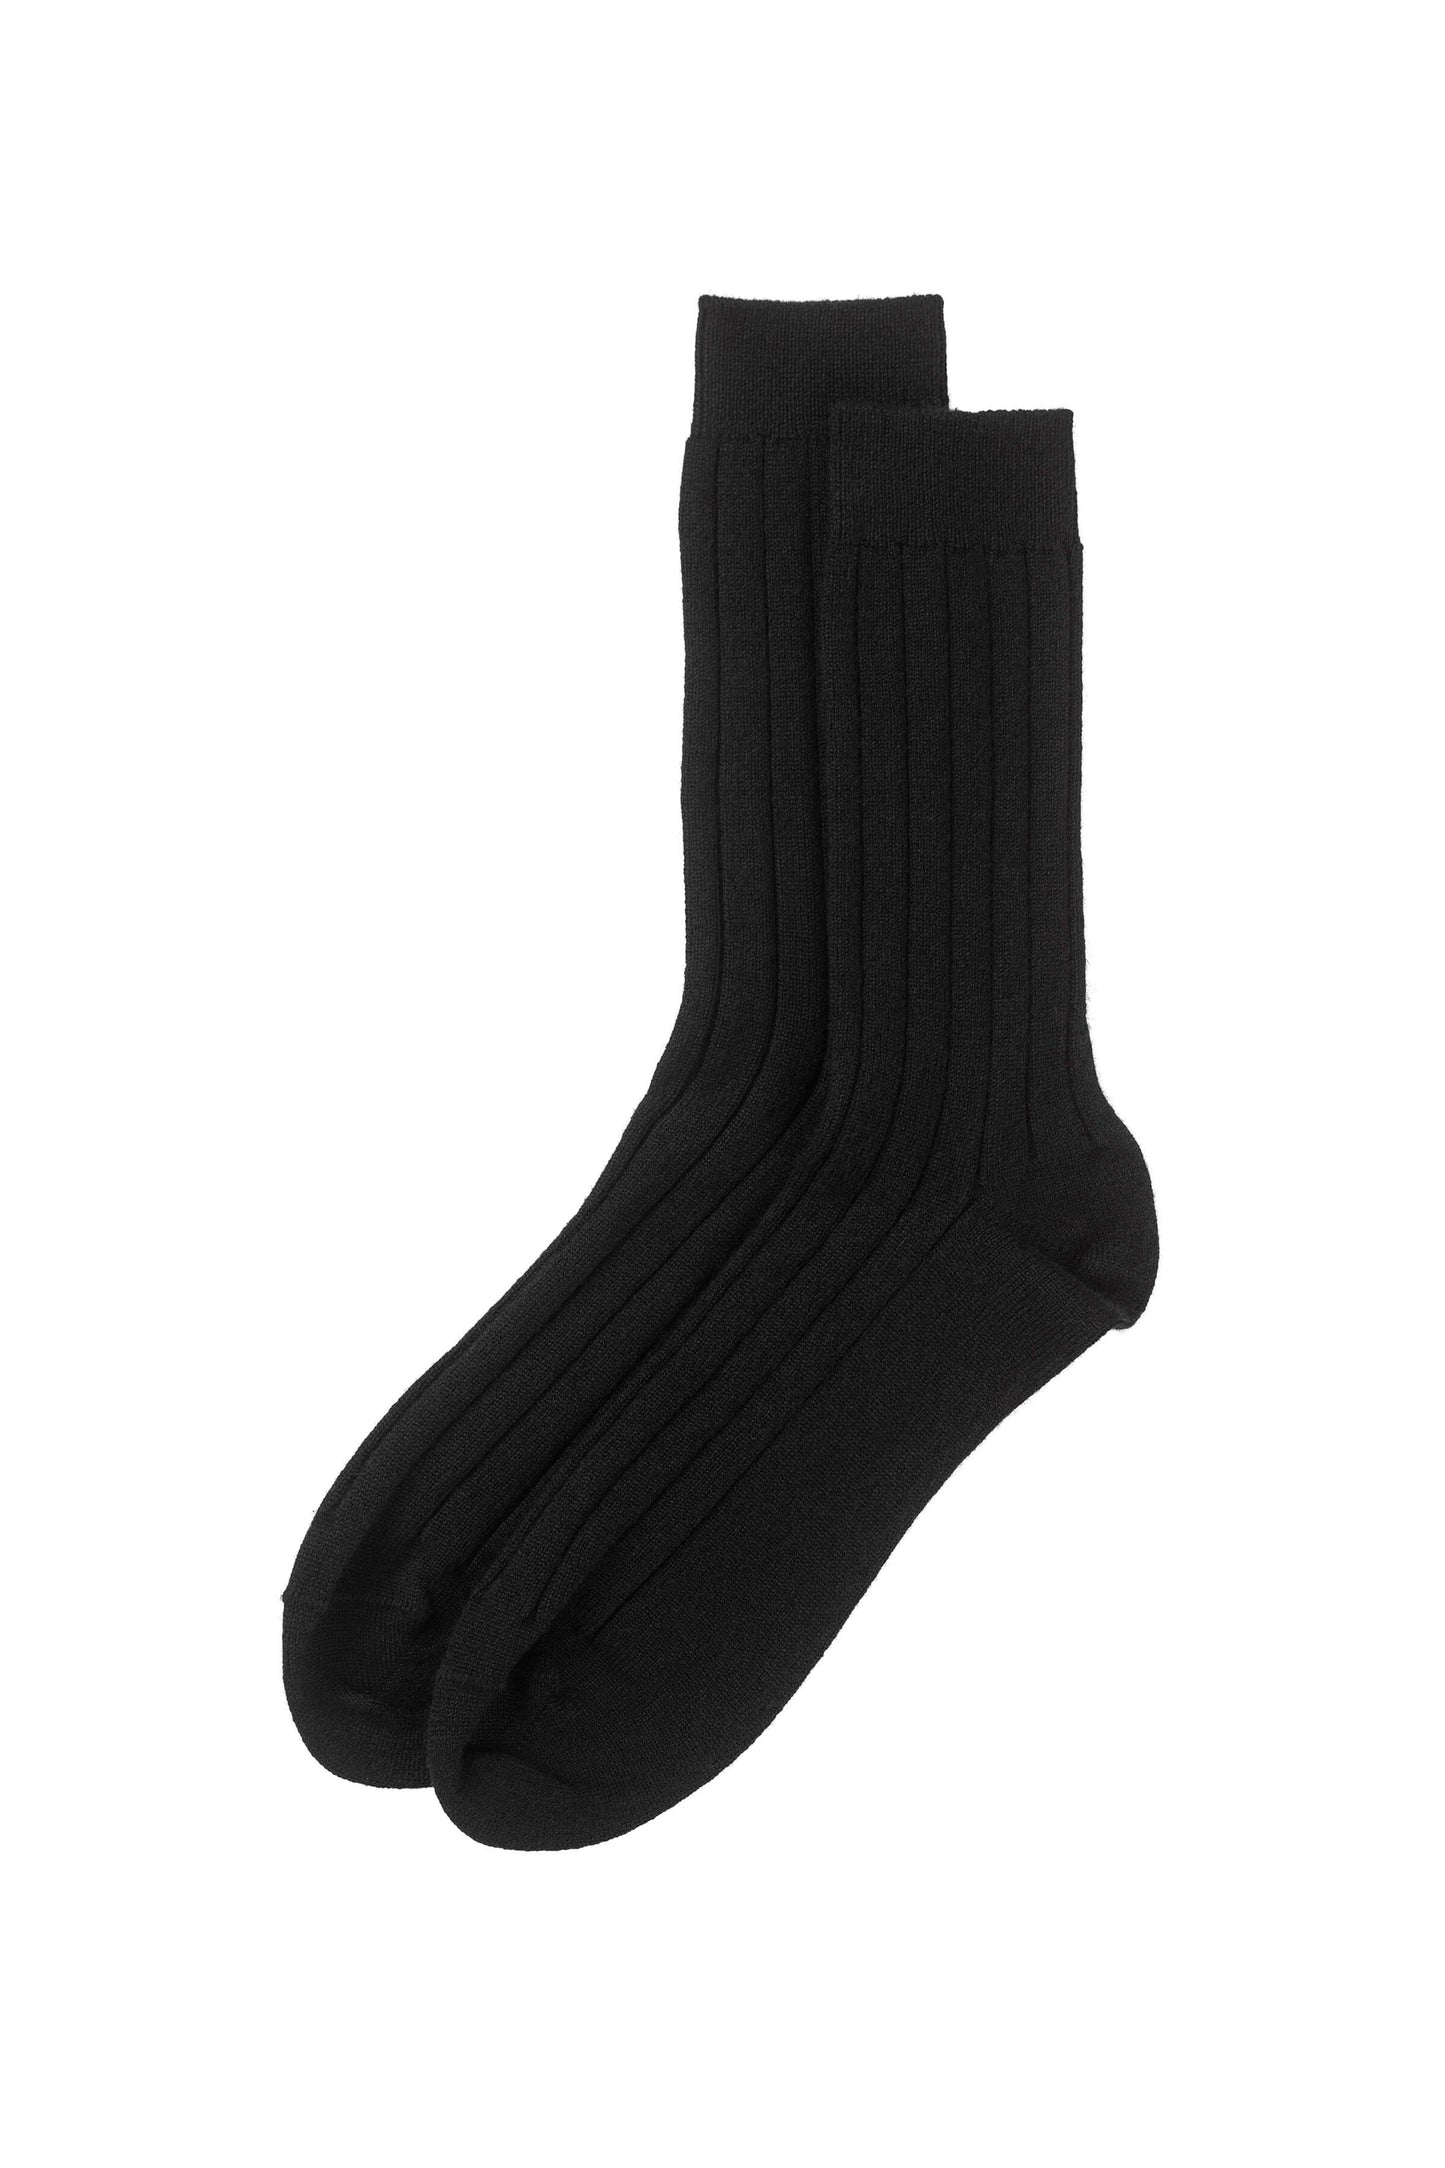 Johnstons of Elgin AW24 Knitted Accessory Black Men's Cashmere Ribbed Socks HBN01009SA090042